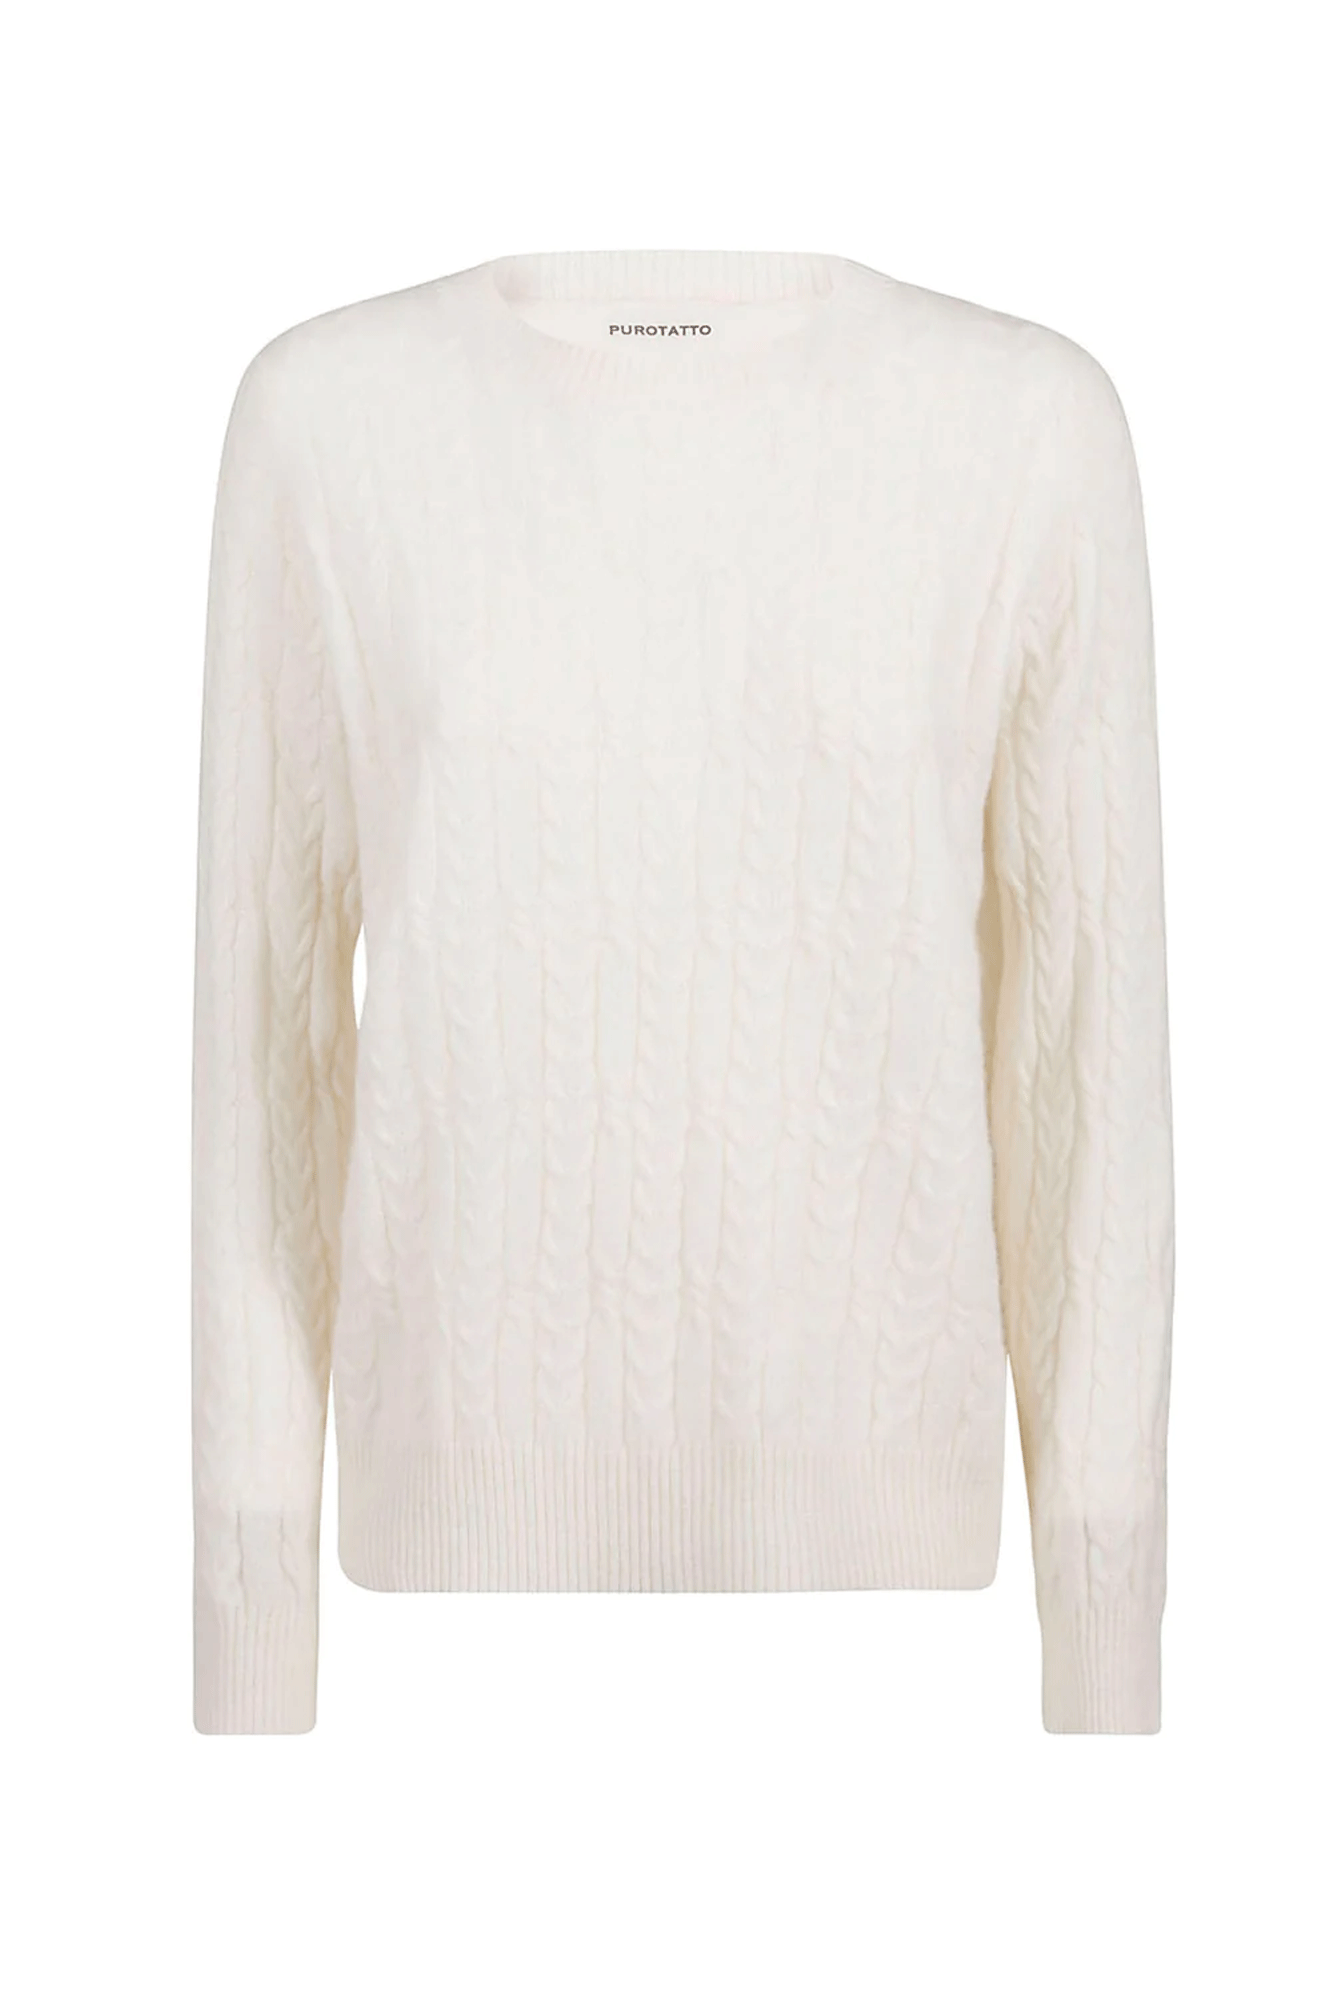 This Roundneck Cable Sweater from Purottato is made from a high-quality blend that offers comfort, warmth, and breathability. Its intricate cable-knit pattern is sure to elevate any wardrobe. Wear it with jeans and boots for a classic look.